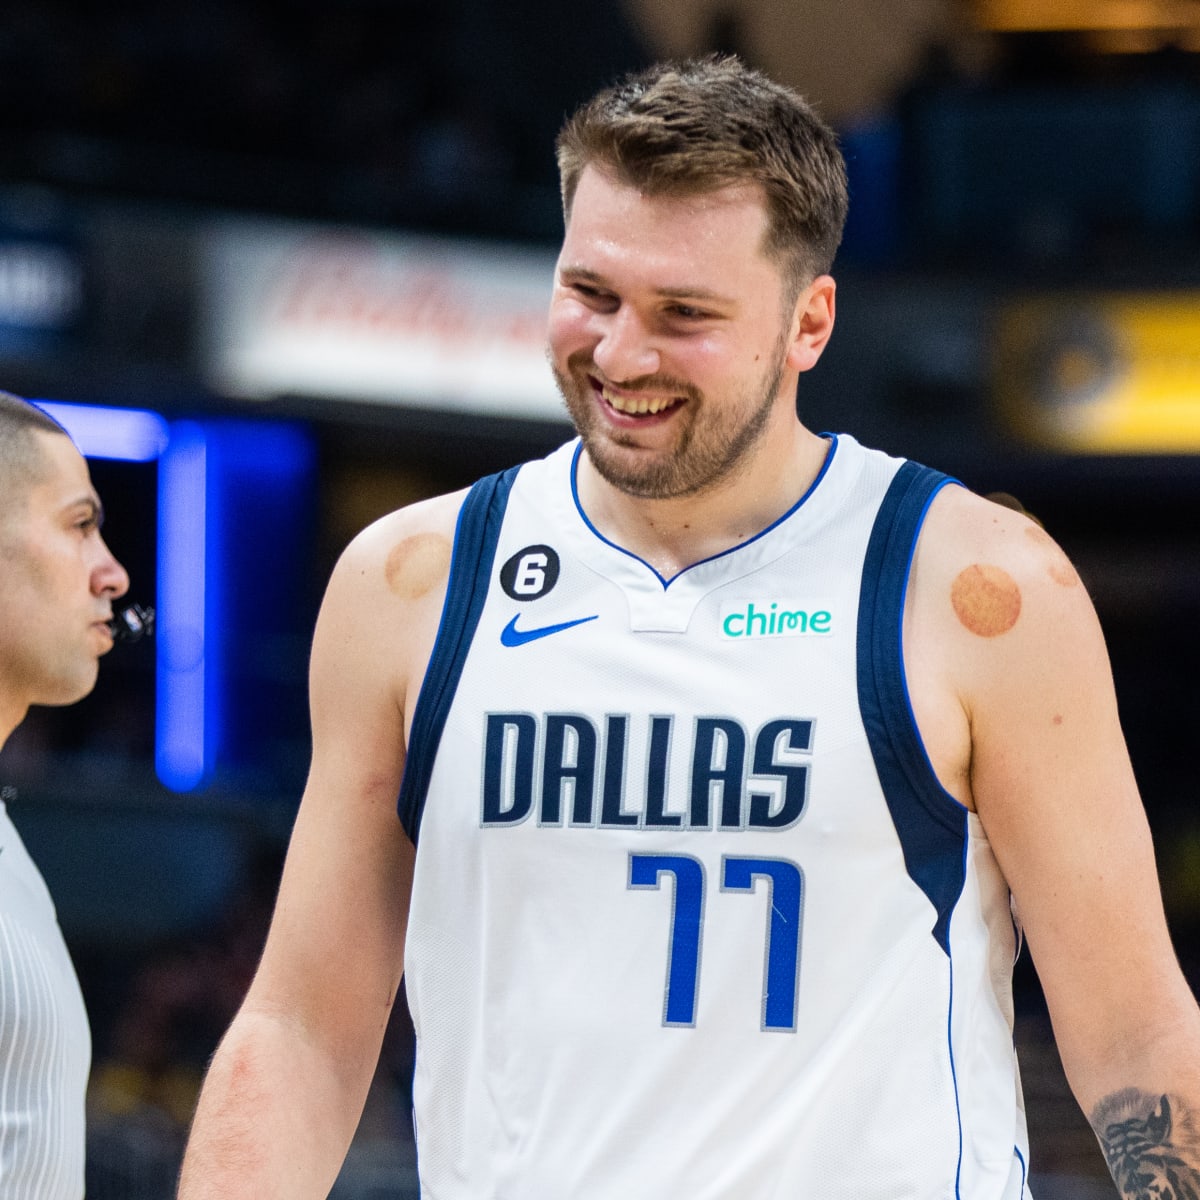 ESPN Analyst: Dallas Mavs Star Luka Doncic to Be 'First $80